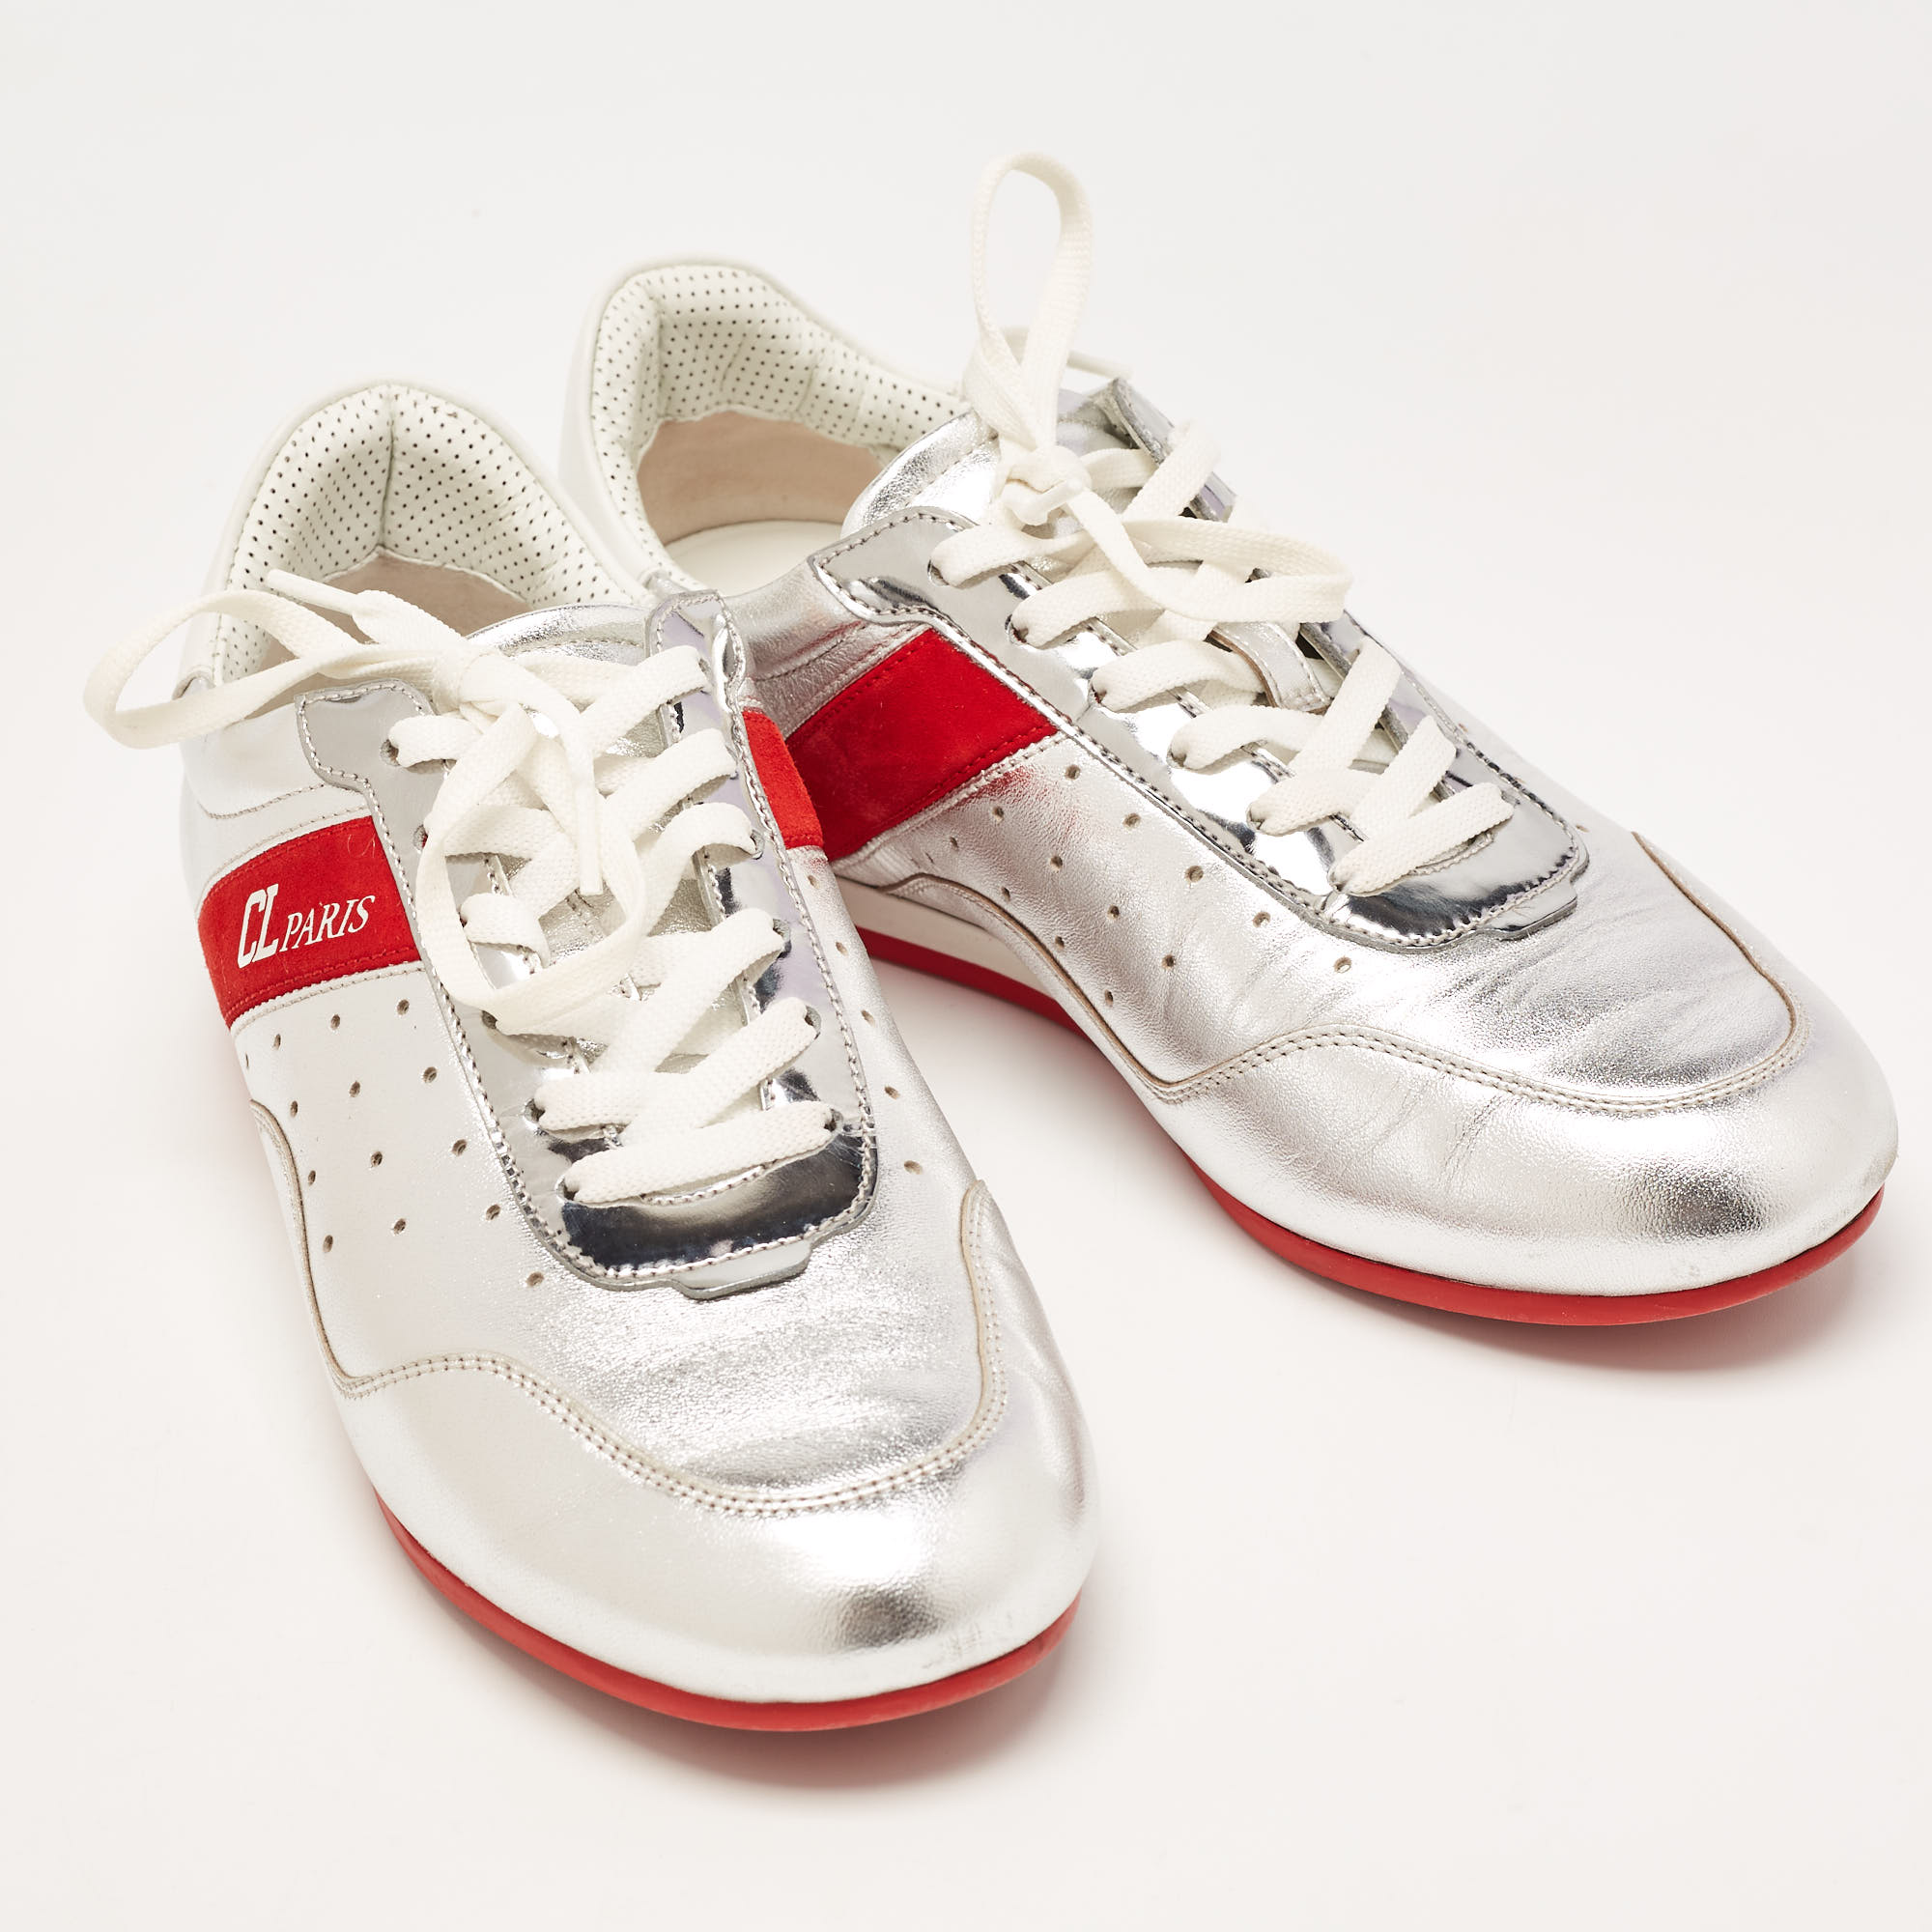 Christian Louboutin Silver/Red Leather And Suede My K Low Sneakers Size 36.5